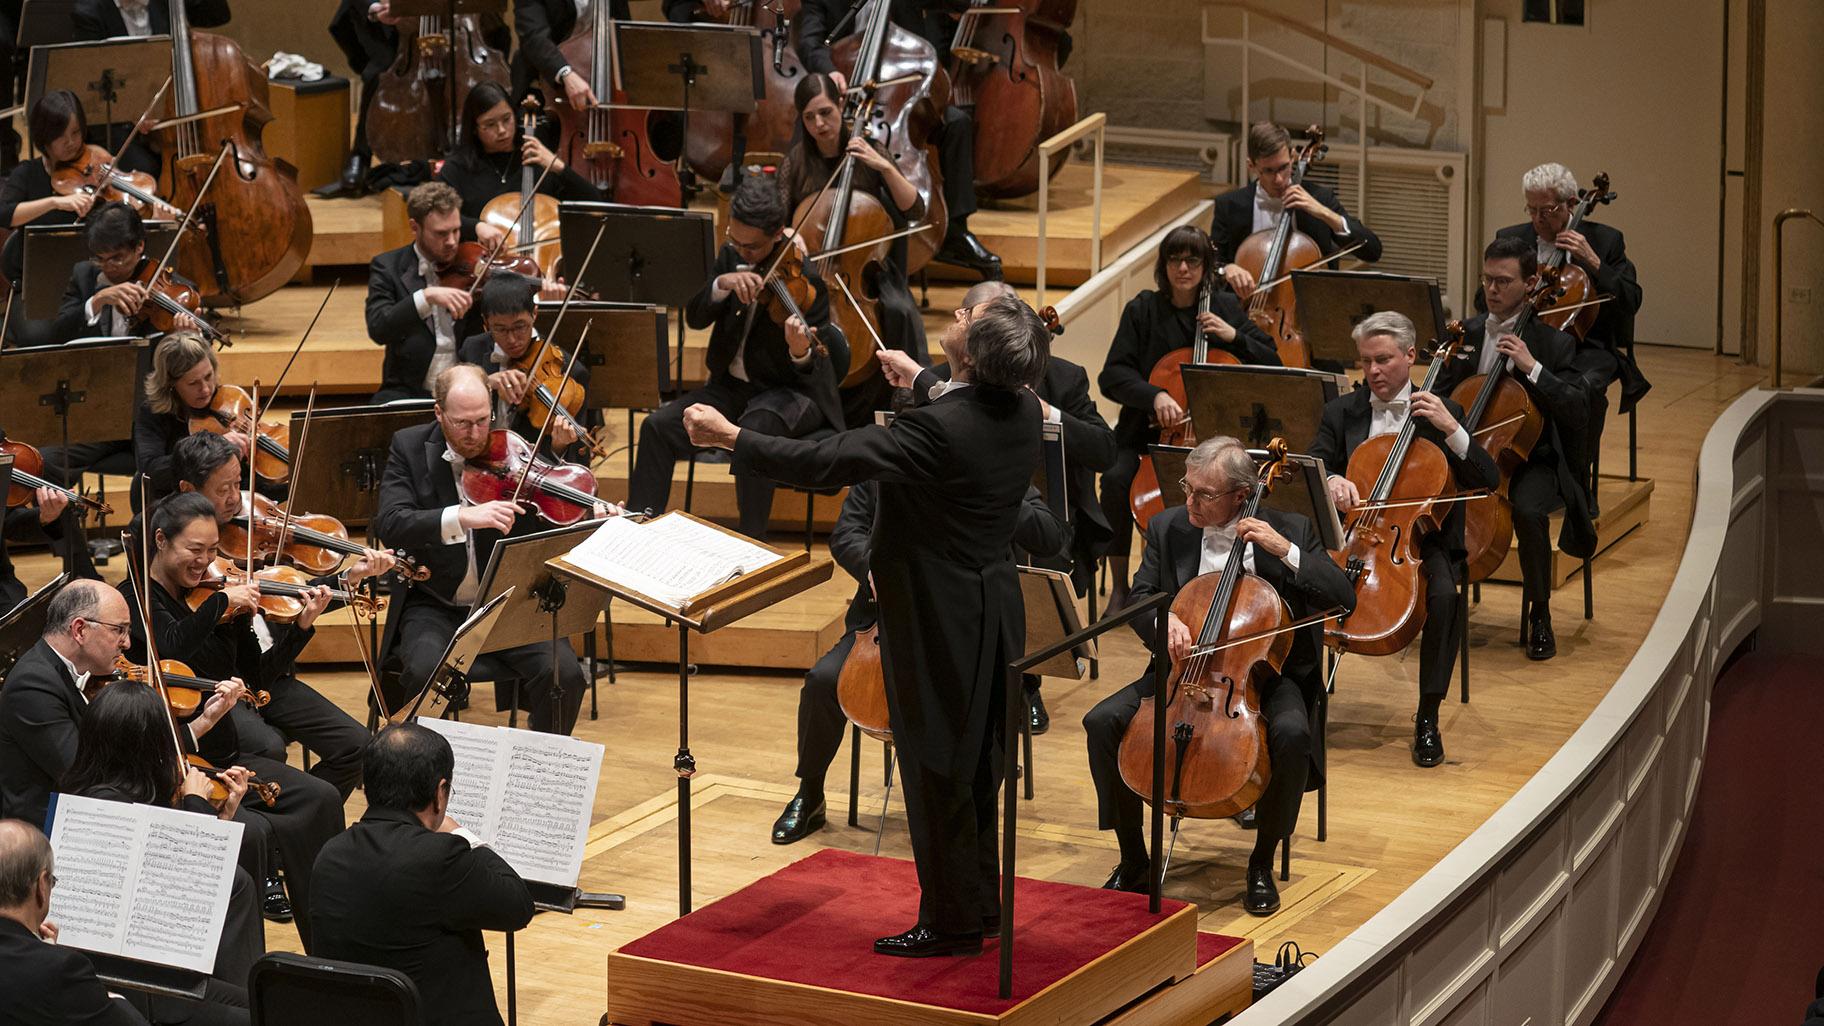 Zell Music Director Riccardo Muti conducts the Chicago Symphony Orchestra in a program featuring Beethoven’s Second and Fifth Symphonies on Feb. 20, 2020. (Credit: Todd Rosenberg)